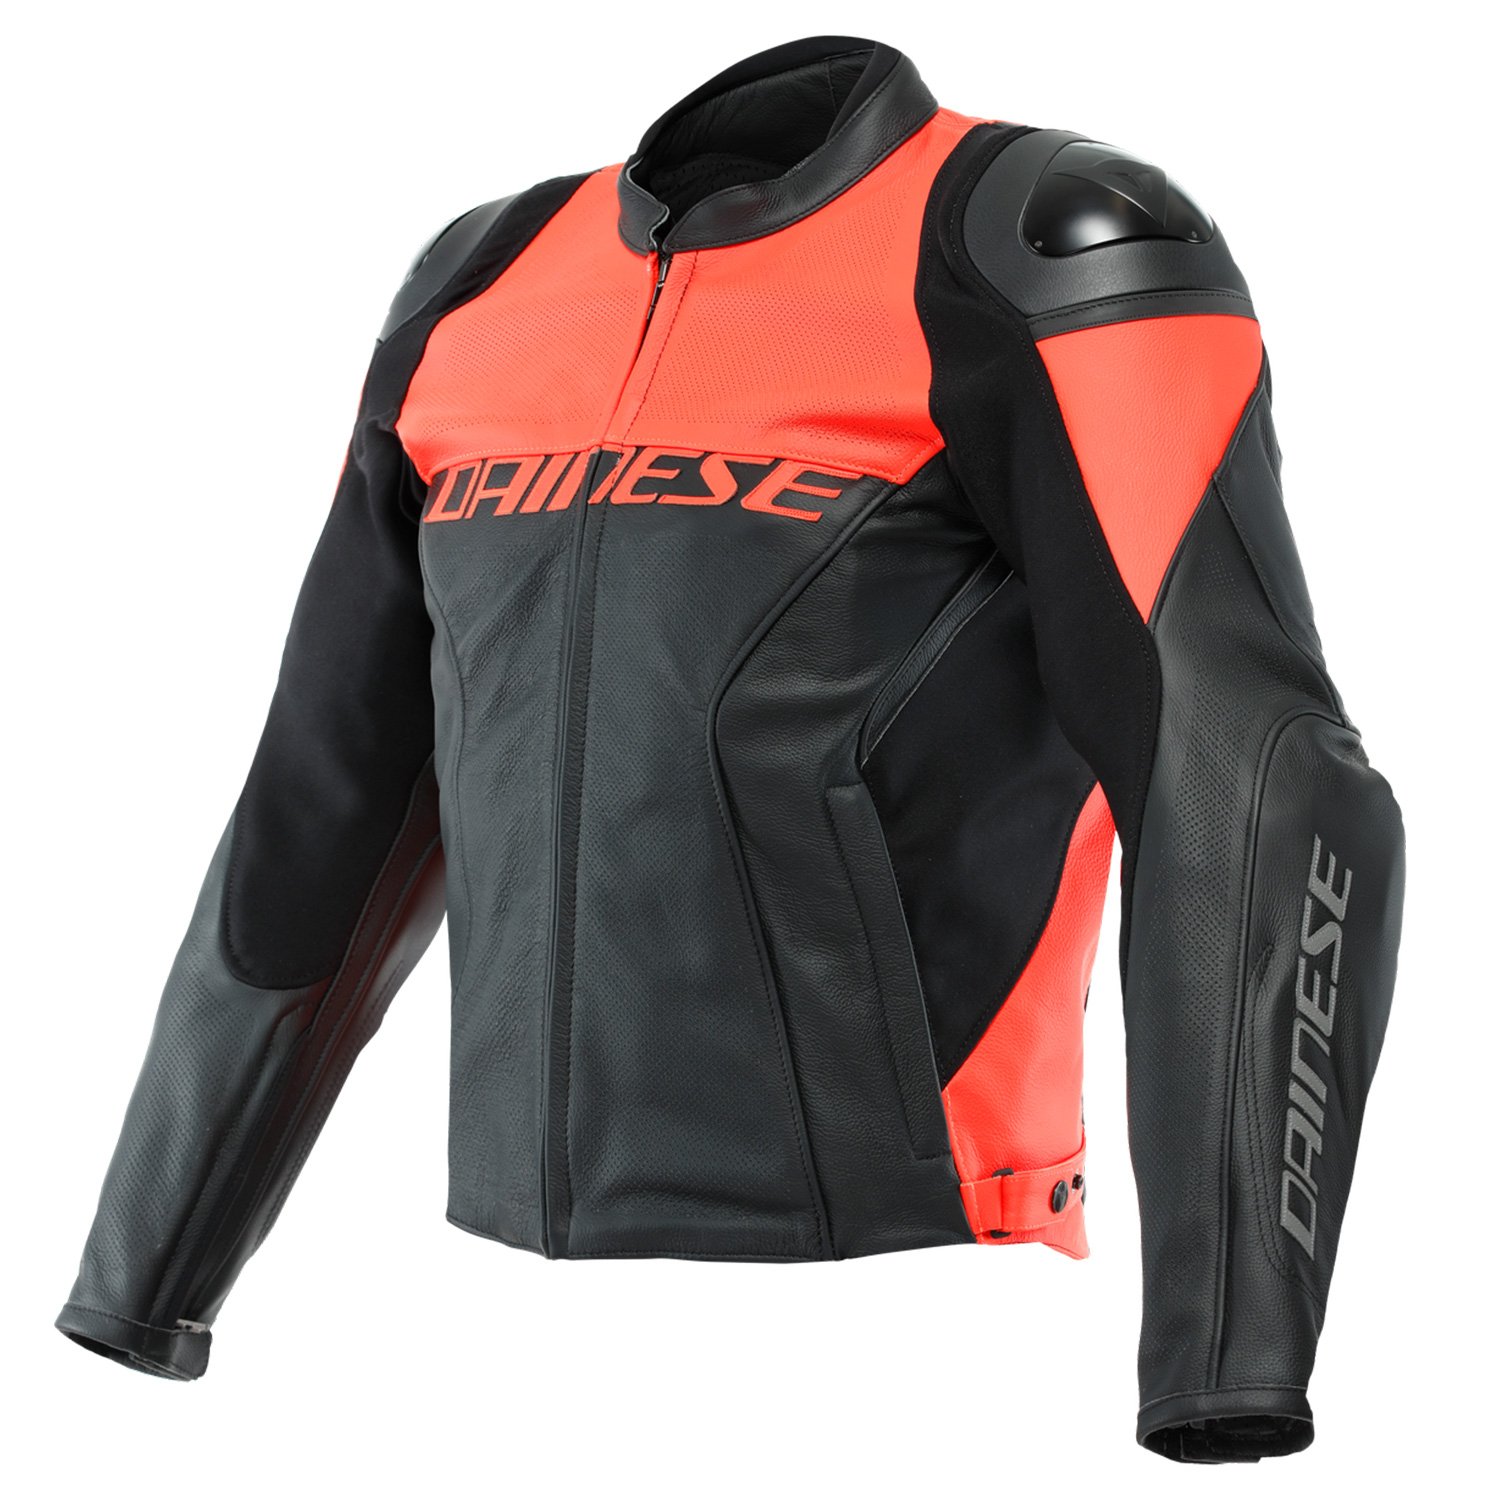 Image of Dainese Racing 4 Perforated Leather Schwarz Fluo Rot Jacke Größe 58